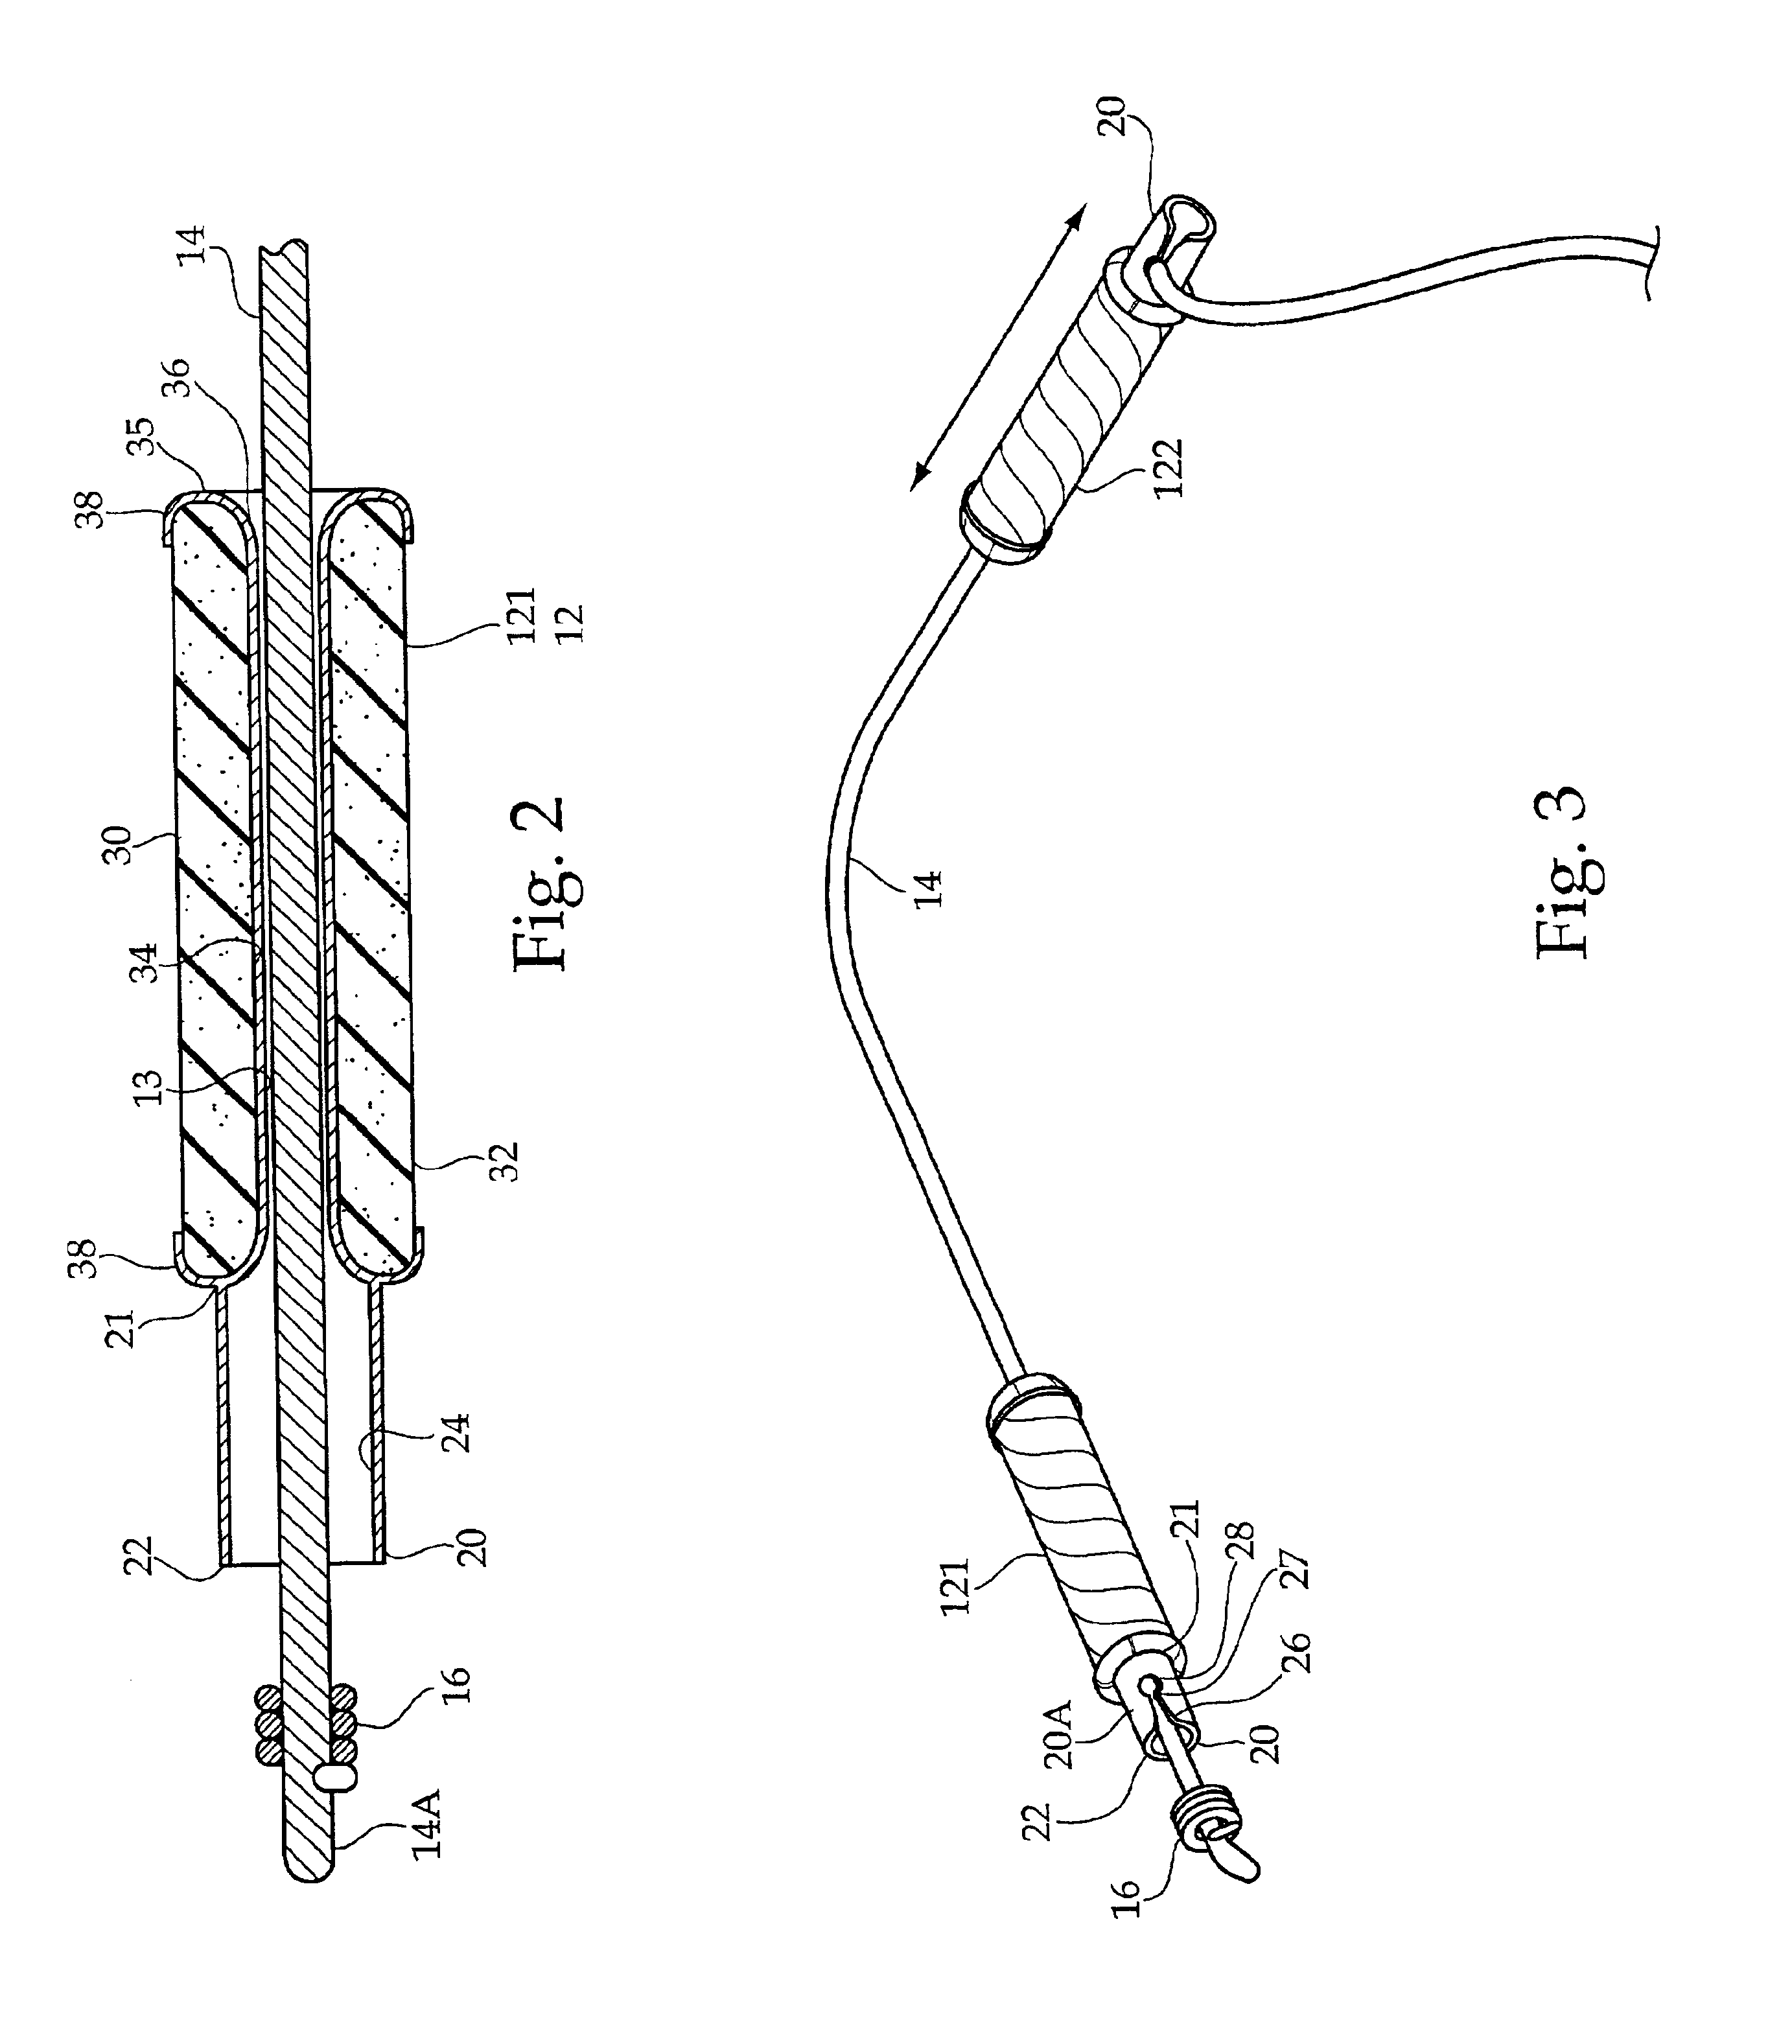 Exercise device with integrated handle and stopping device